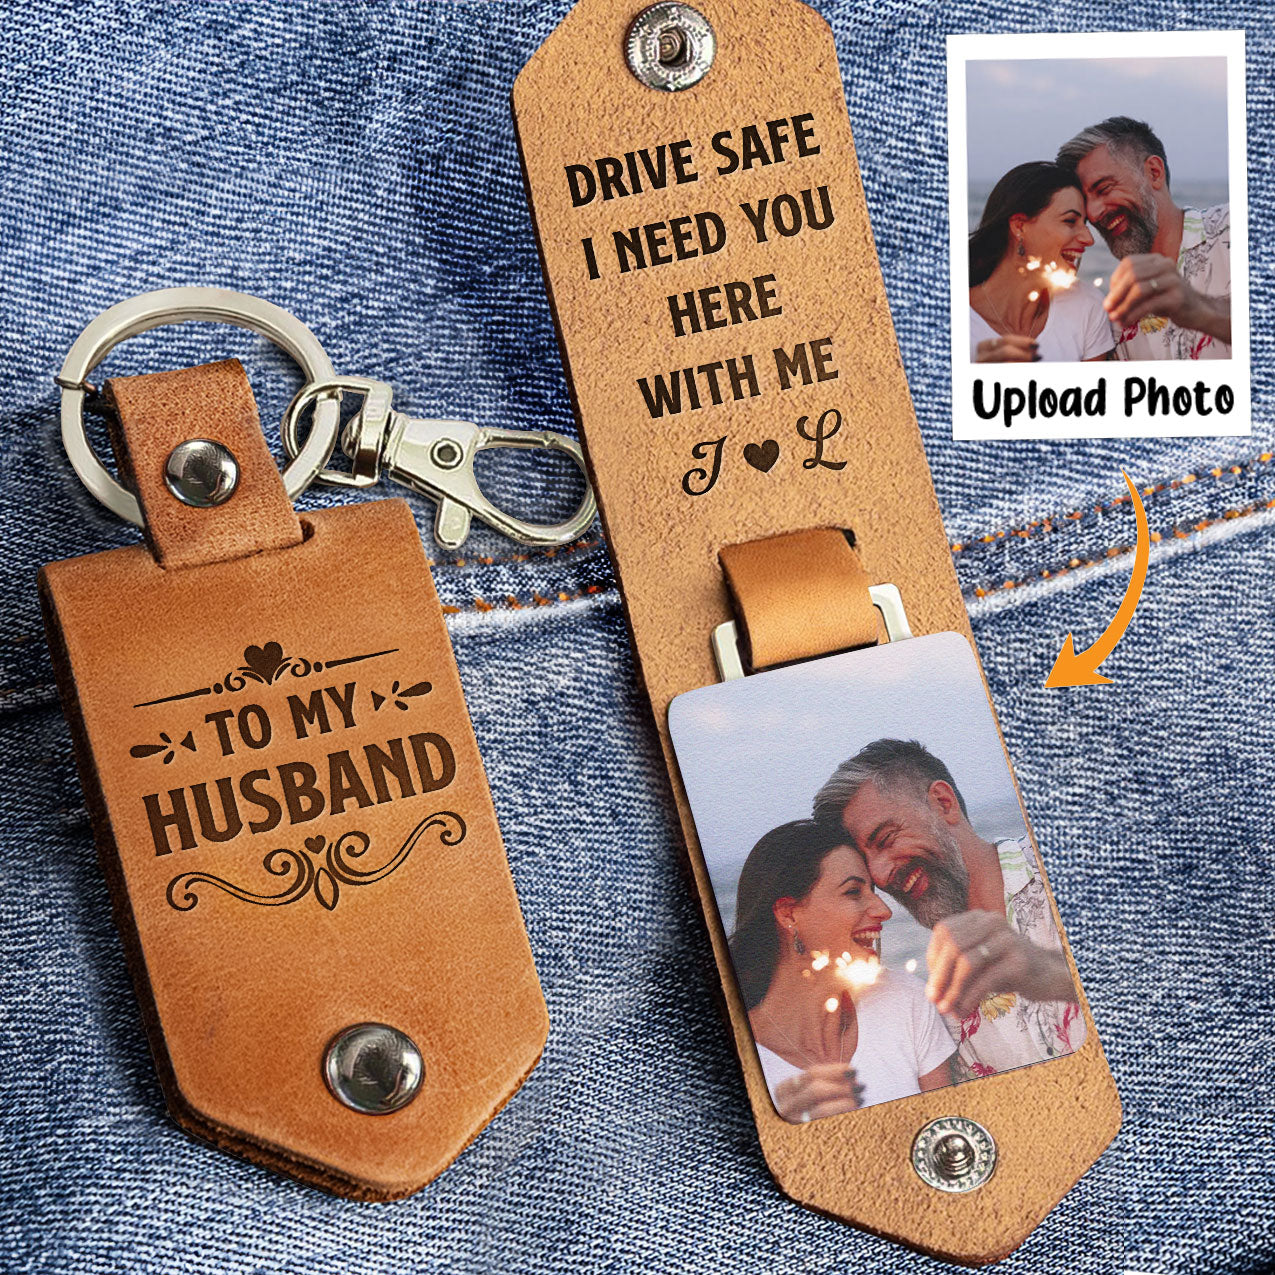 http://macorner.co/cdn/shop/files/Drive-Safe-I-Need-You-Here-With-Me-Personalized-Leather-Photo-Keychain_1.jpg?v=1699237223